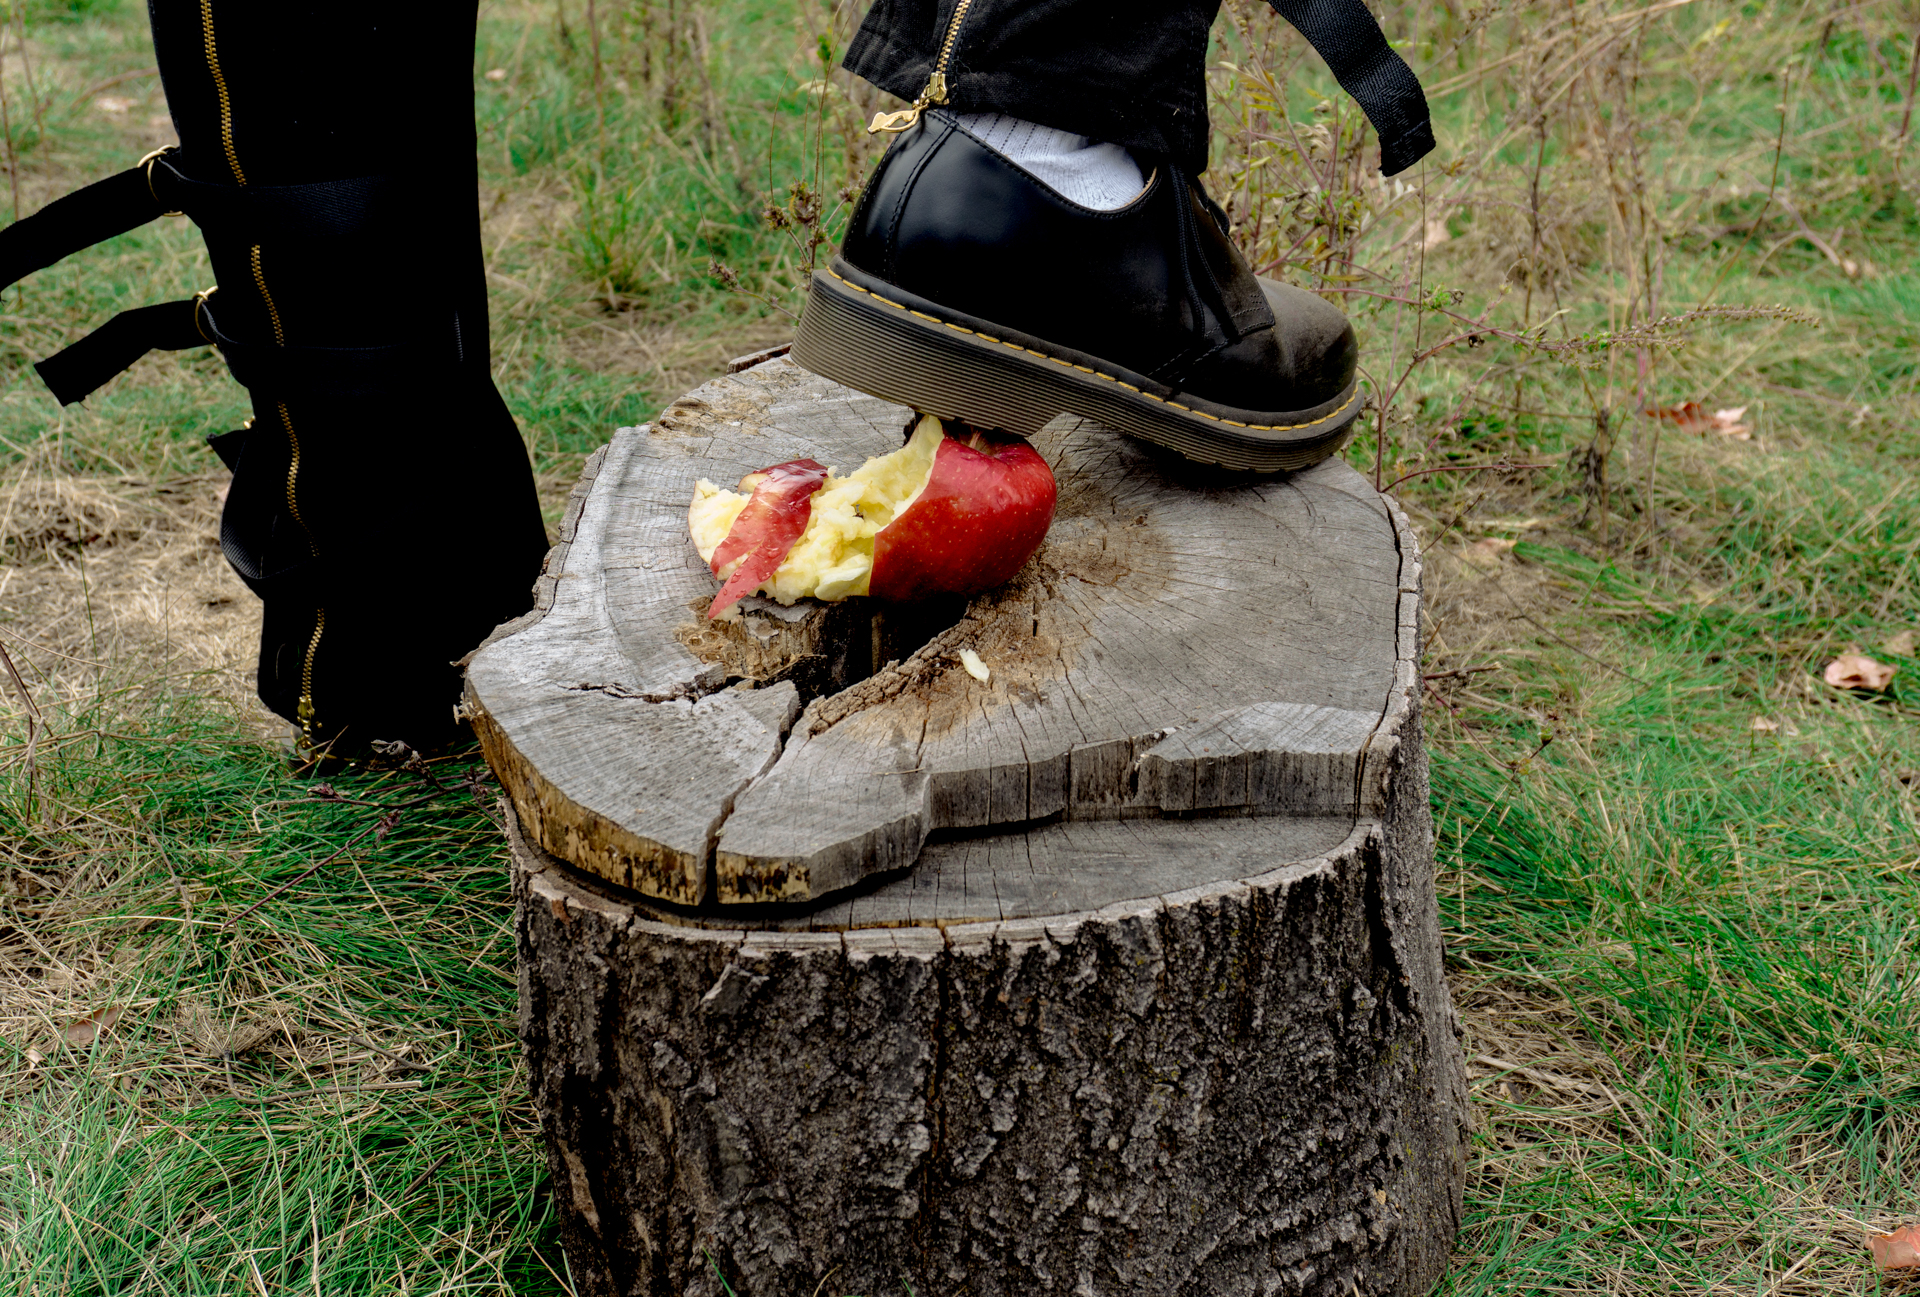 Crushed my Heart (Last Supper): A foot wearing a black leather shoe and a white sock steps off a freshly stepped on apple sitting on a tree stump. Green grass surrounds the stump